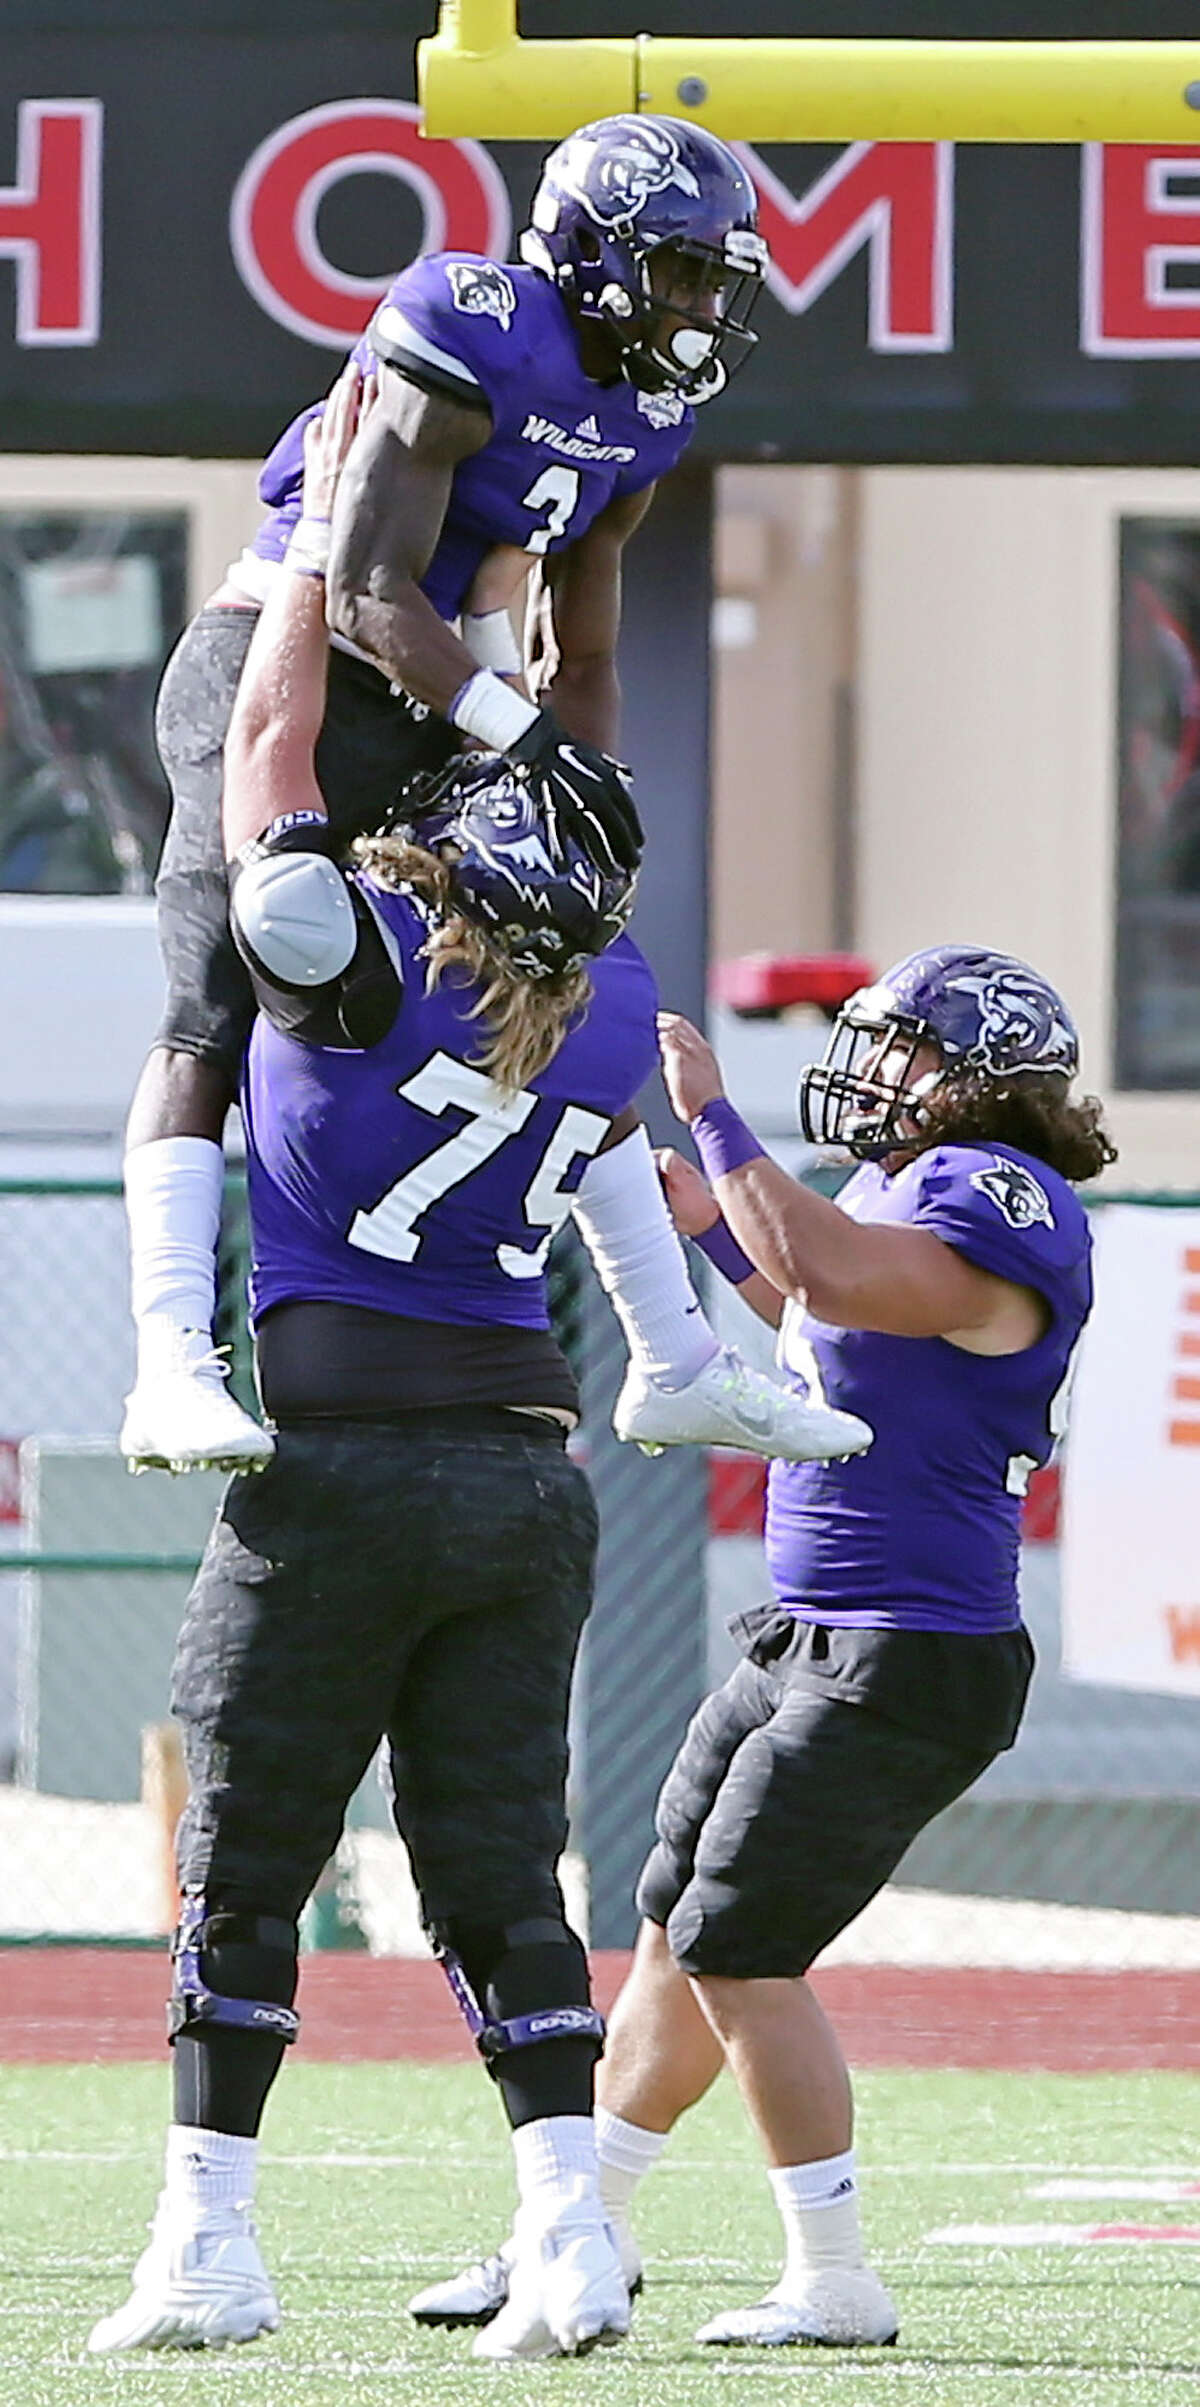 Abilene Christian University's Carl Whitley (top) celebrates with teammates Chance Rieken (left) and Frank Kee after scoring a touchdown during second half action against the University of the Incarnate Word Sunday Oct. 25, 2015 at Benson Stadium on the UIW campus. UIW won 25-20.